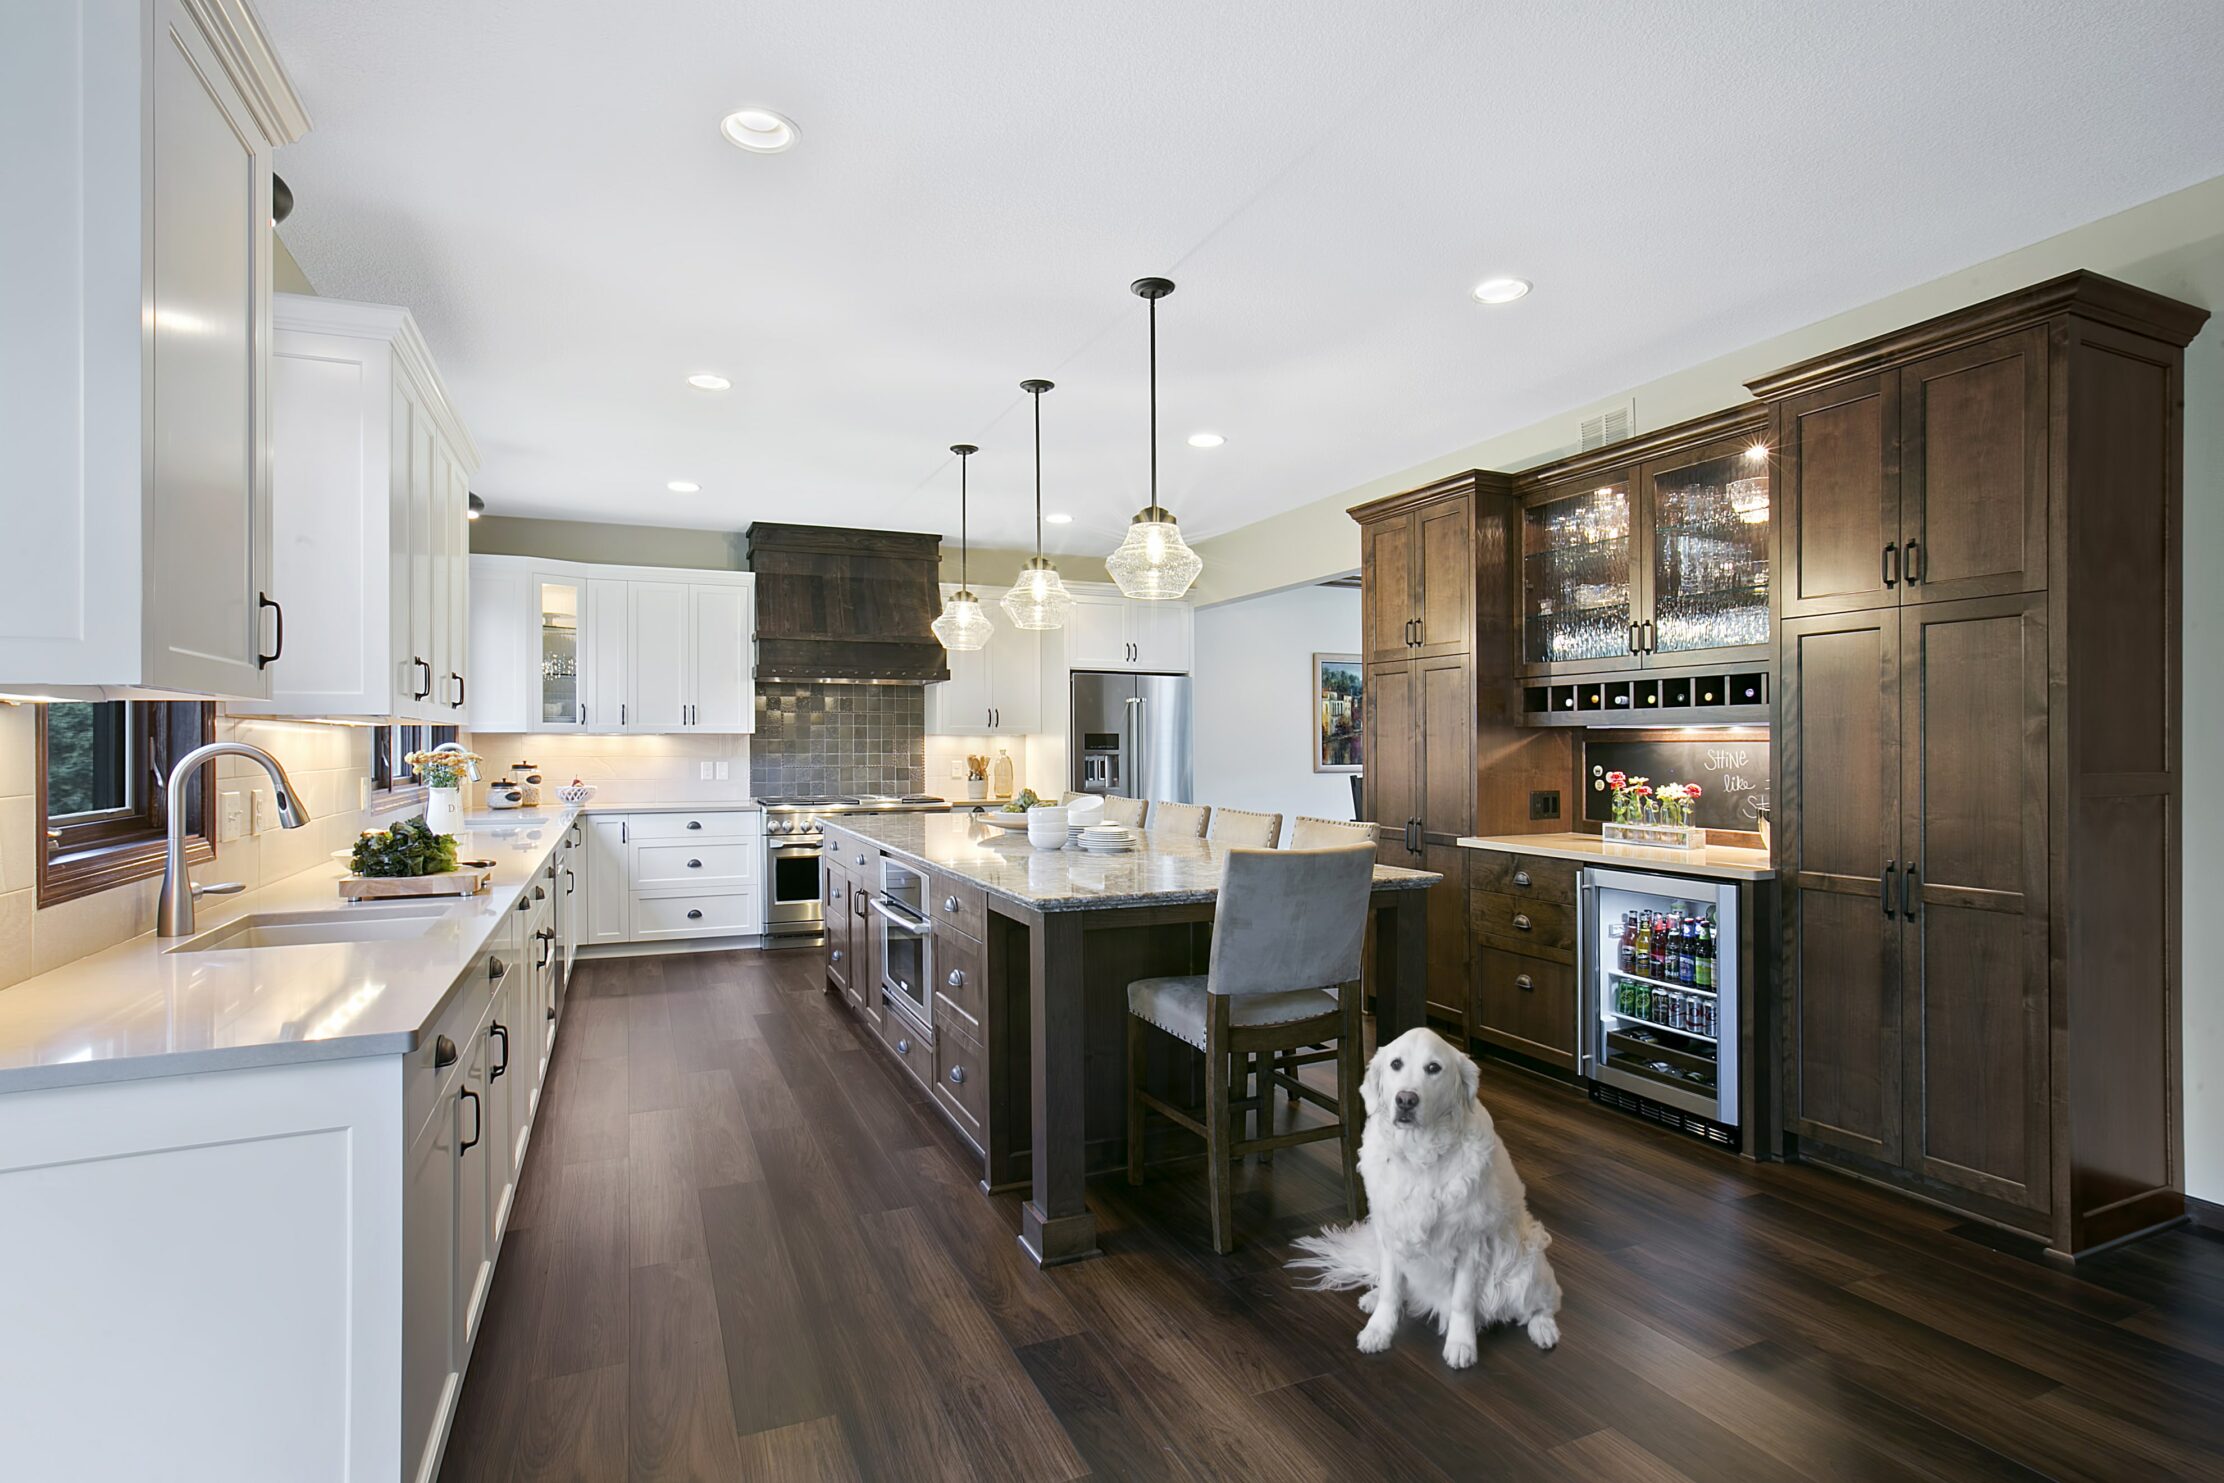 Twin Cities kitchen remodel with dog sitting in the middle